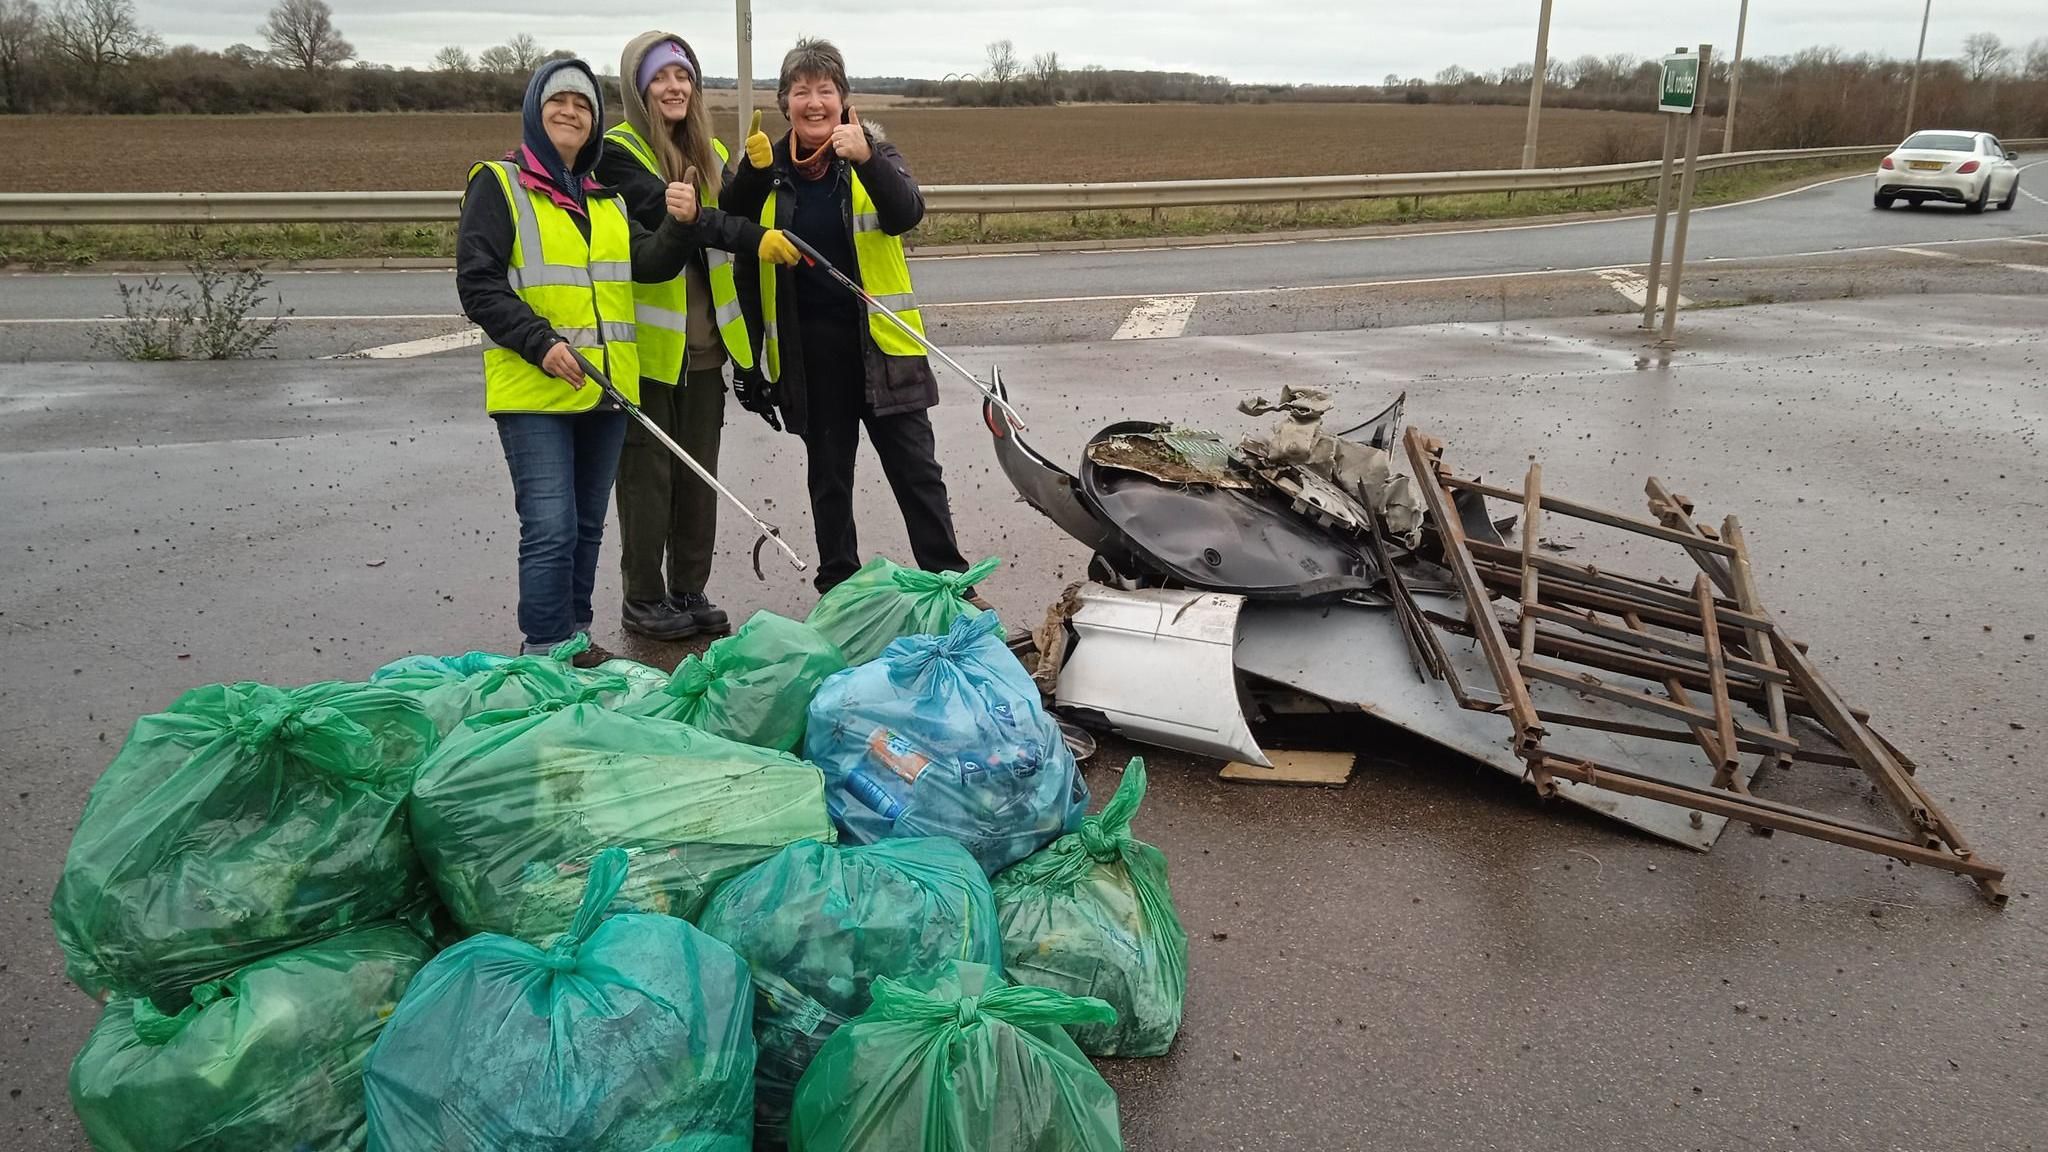 Litter picking group with bags of rubbish on the A47